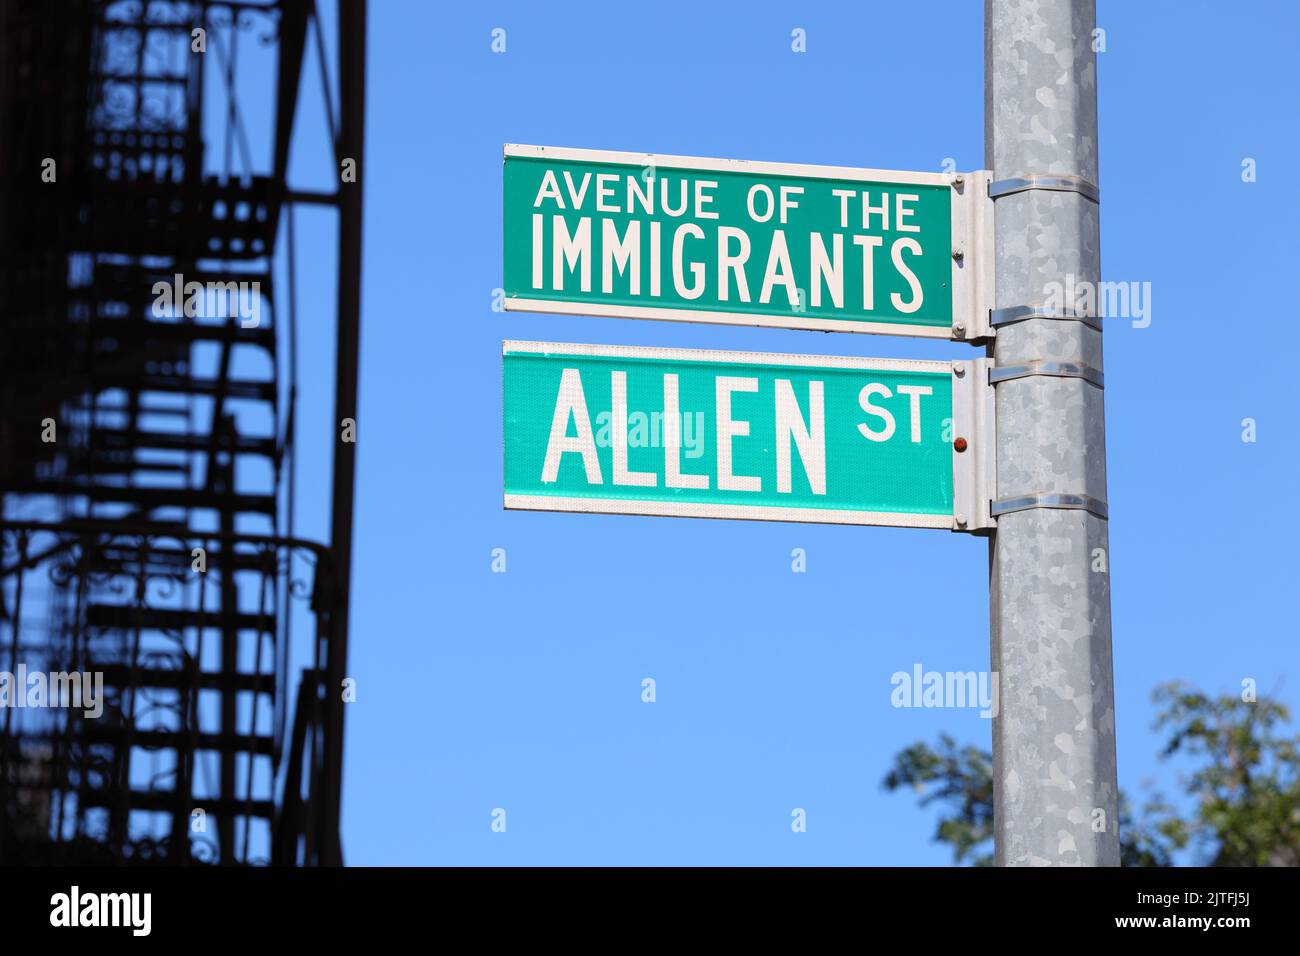 Avenue of the Immigrants and Allen street signs in Manhattan's Chinatown/Lower East Side, New York. Stock Photo